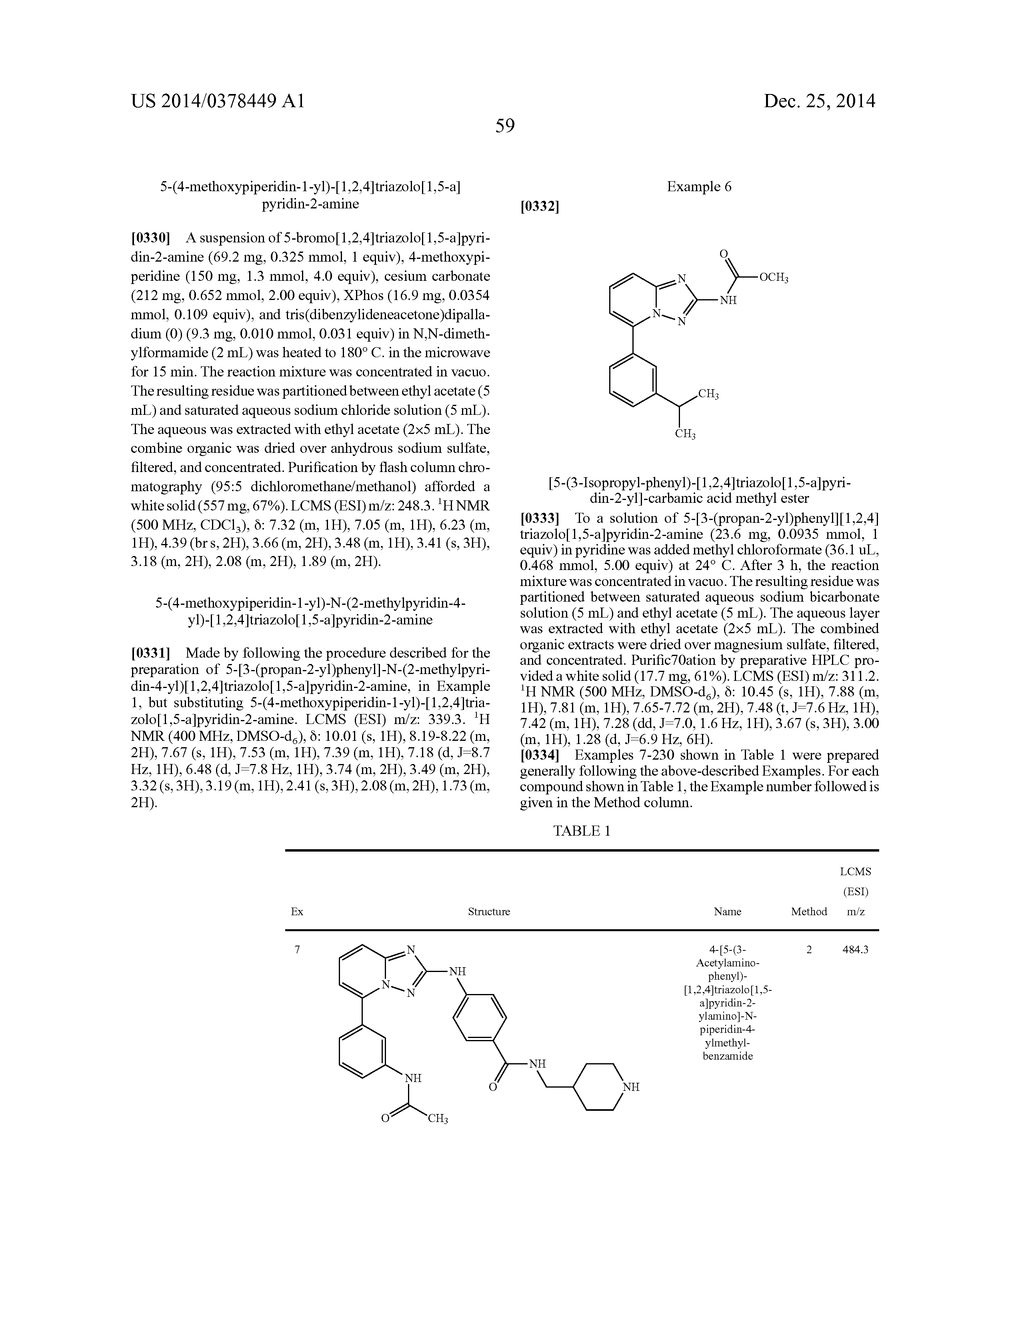 TRIAZOLOPYRIDINE JAK INHIBITOR COMPOUNDS AND METHODS - diagram, schematic, and image 60